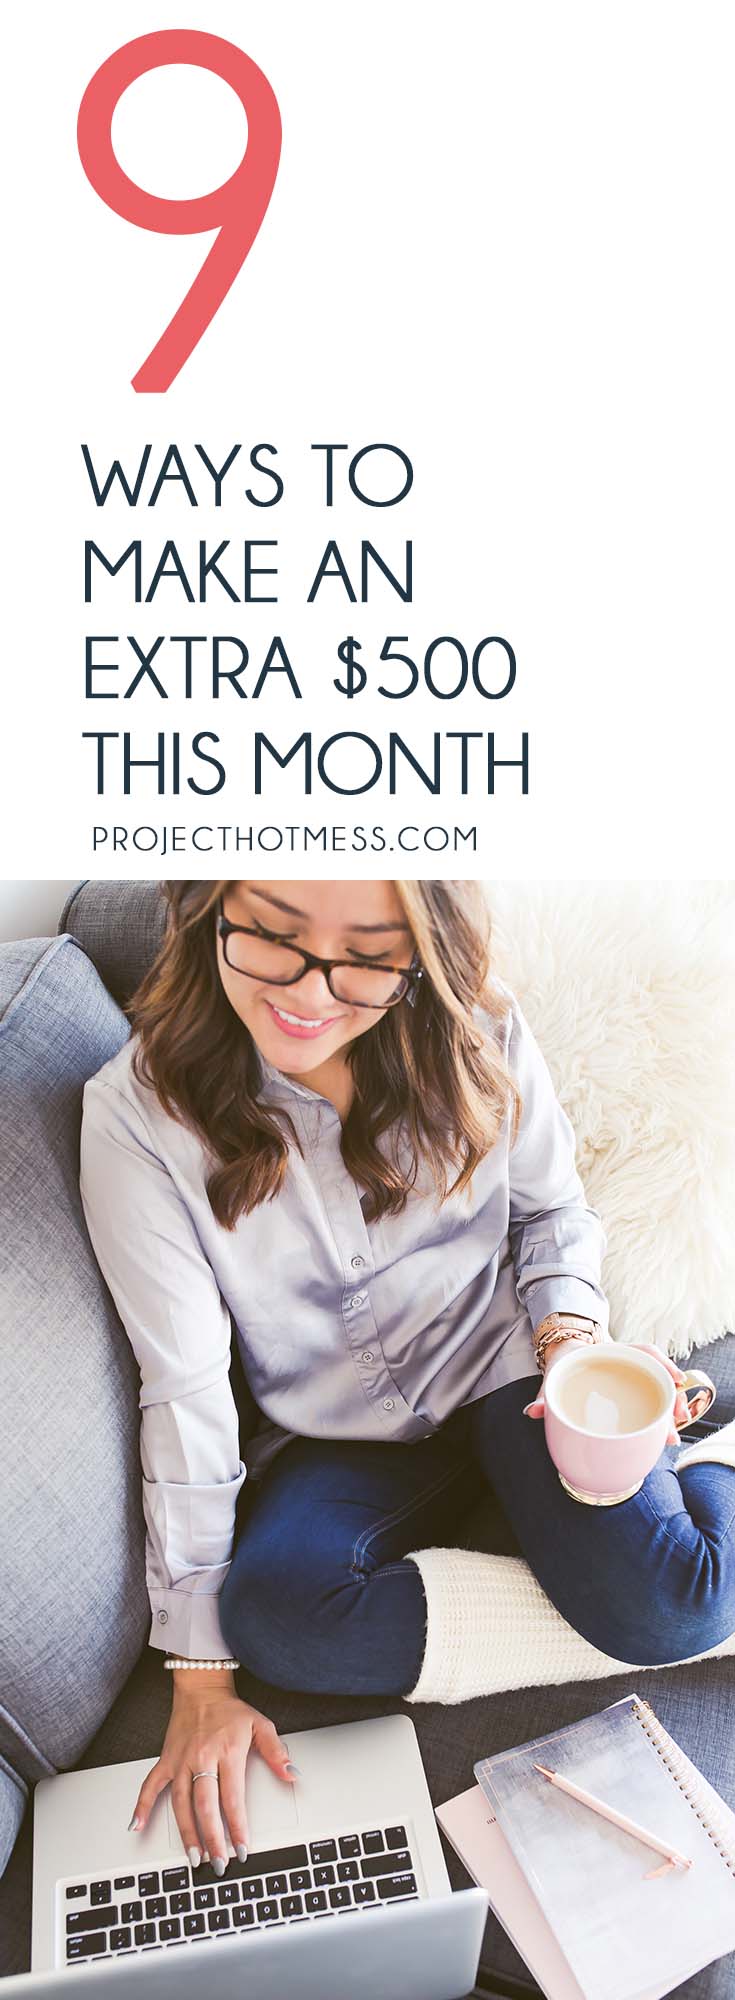 Whether your budget is a little tight or if you're saving for a goal, extra income can go a long way. Here's how you can make an extra $500 this month. Personal Finance | Money | Money Goals | Budgeting | Budgeting Goals | Budgeting Ideas | Finances | Financial Planning | Money Mindset | Positive Money Mindset | Earn Money | Side Hustle | Earn Extra Money